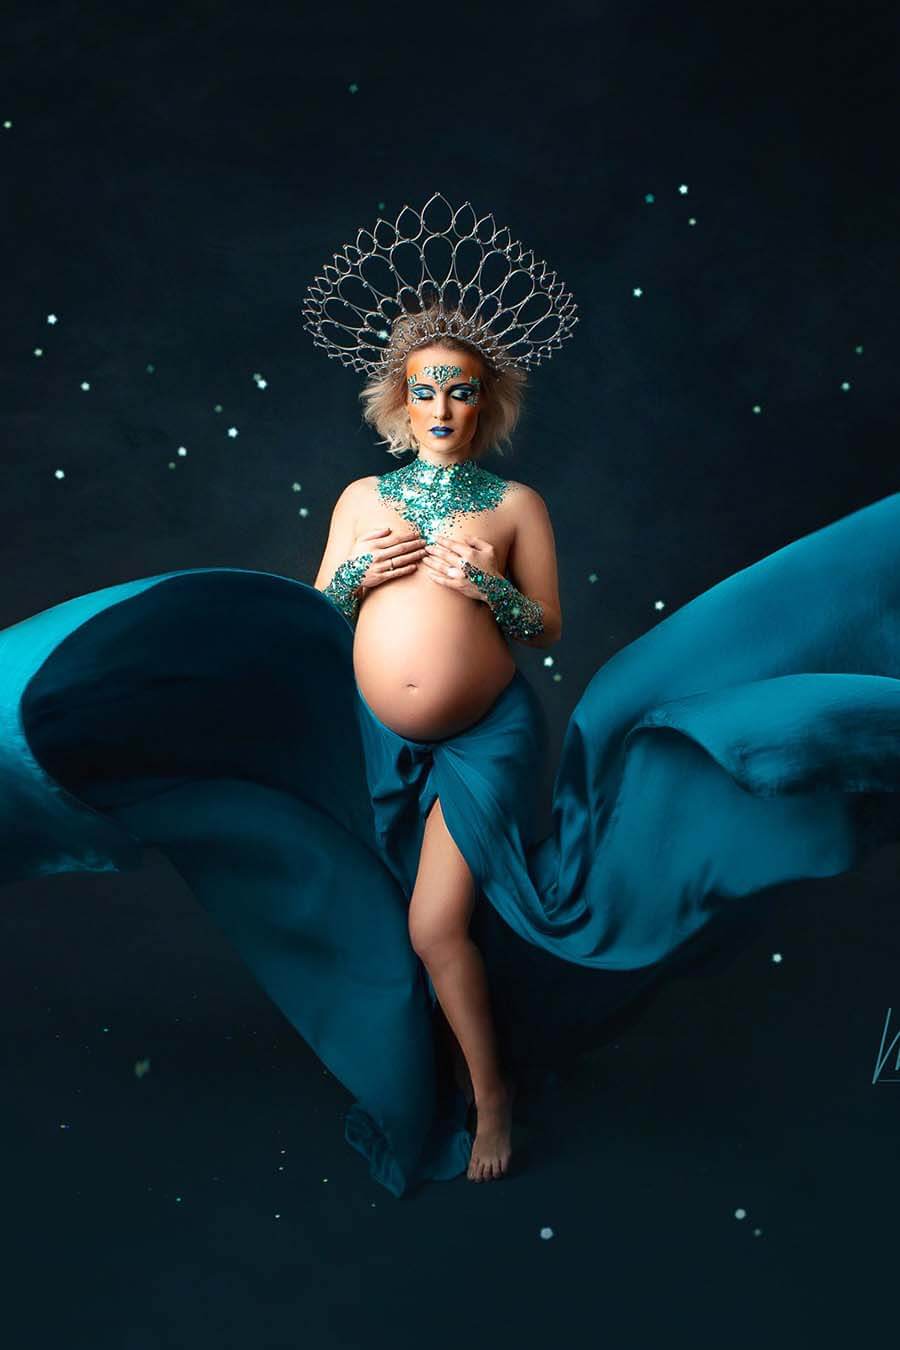 A pregnant woman is posing for the photo. They tied the silky scarf petrol to a skirt with a split by the leg. She is covered in glitters and little diamant stones on her underarms, neckline and her face. She is wearing a huge crown in her hair.